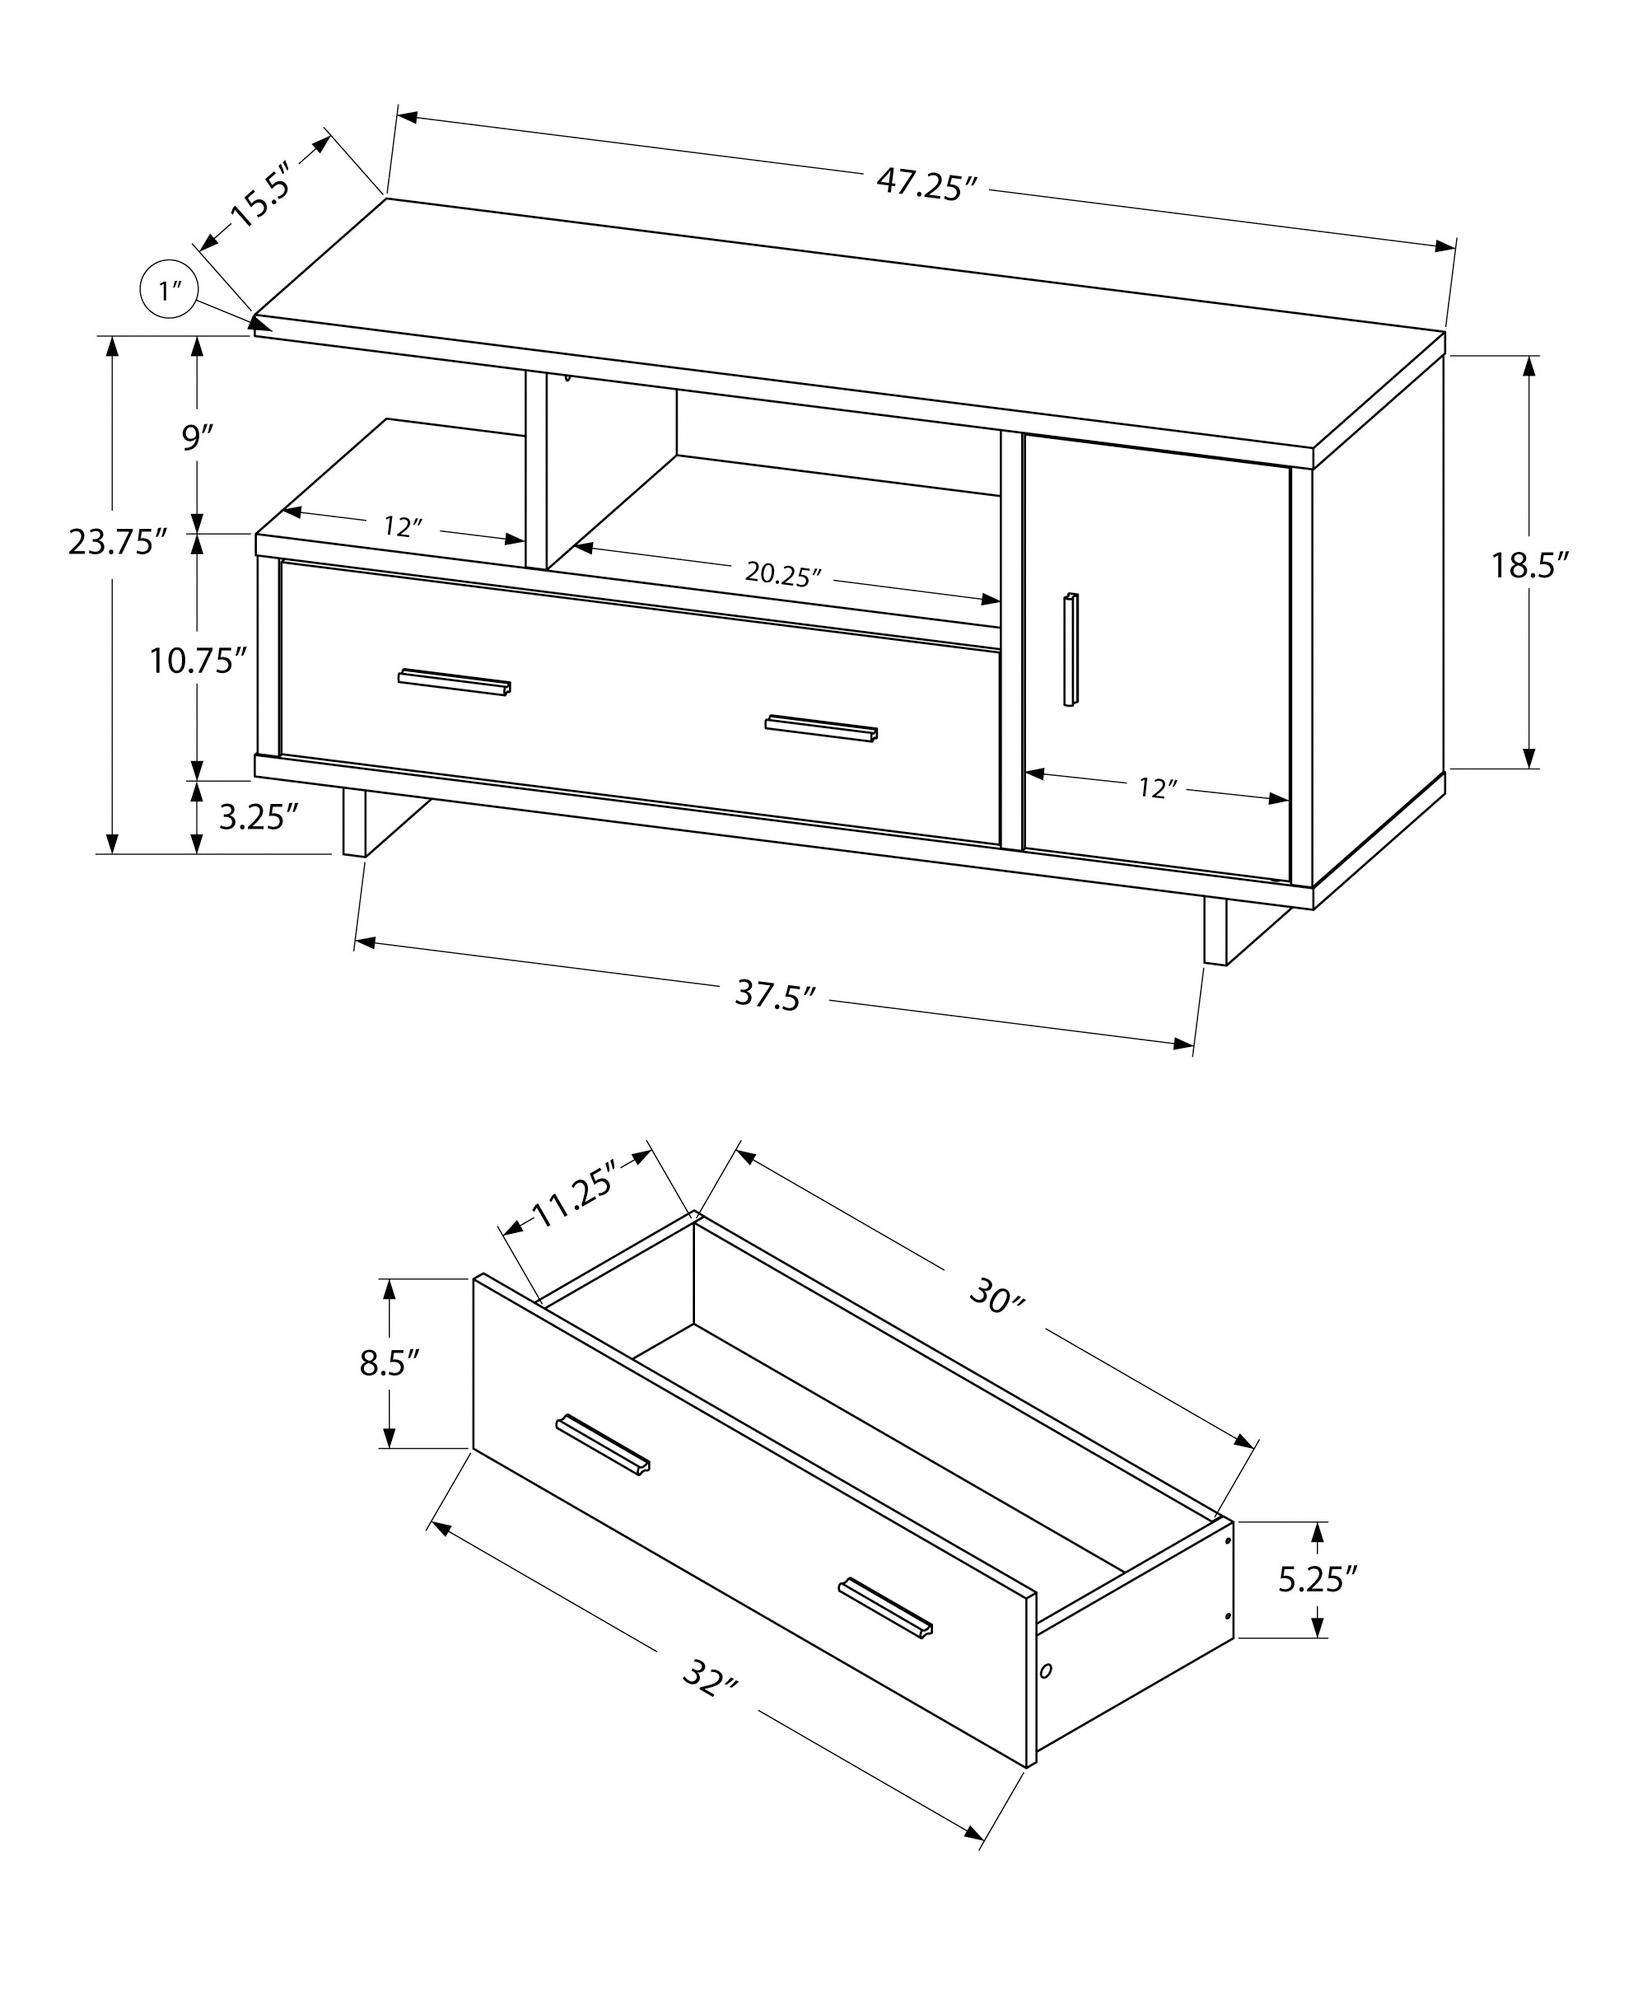 TV STAND - 48"L / WHITE WITH STORAGE